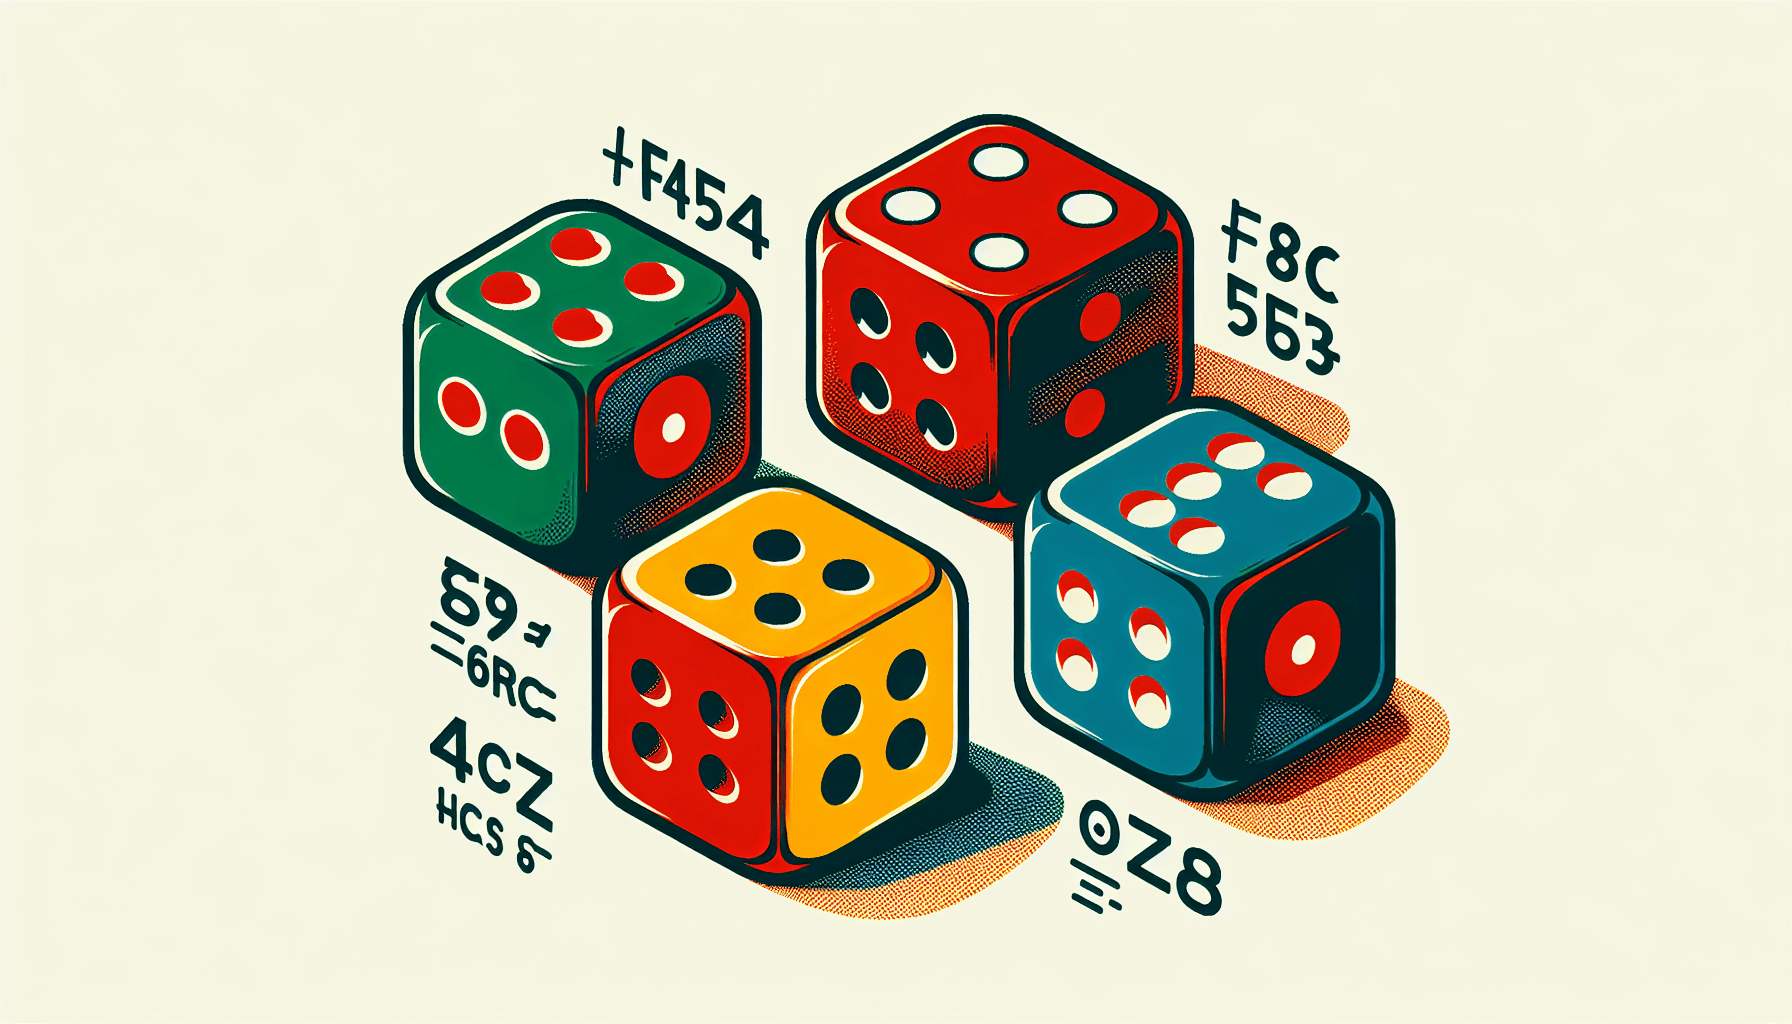 Dice in flat illustration style and white background, red #f47574, green #88c7a8, yellow #fcc44b, and blue #645bc8 colors.